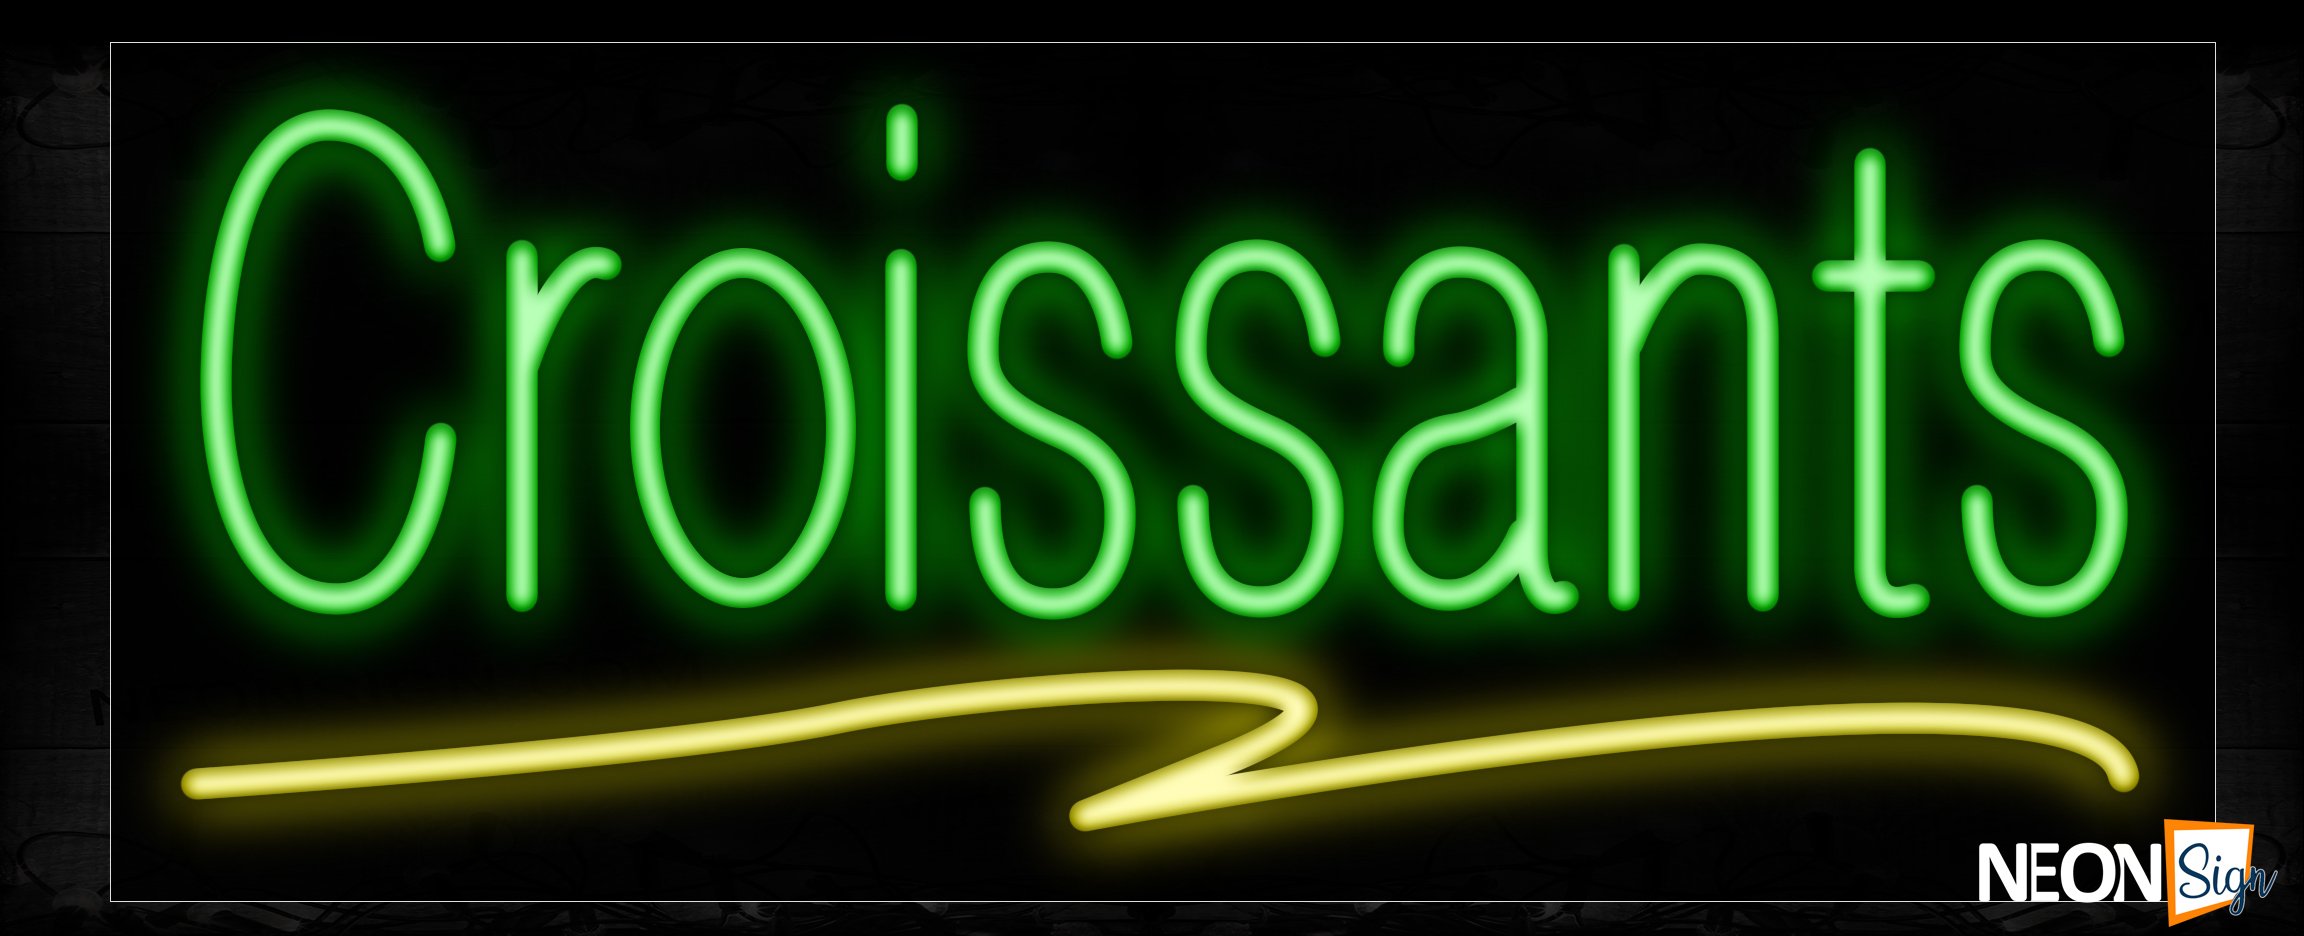 Image of 10187 Croissants in green and yellow line Neon Sign_13x32 Black Backing